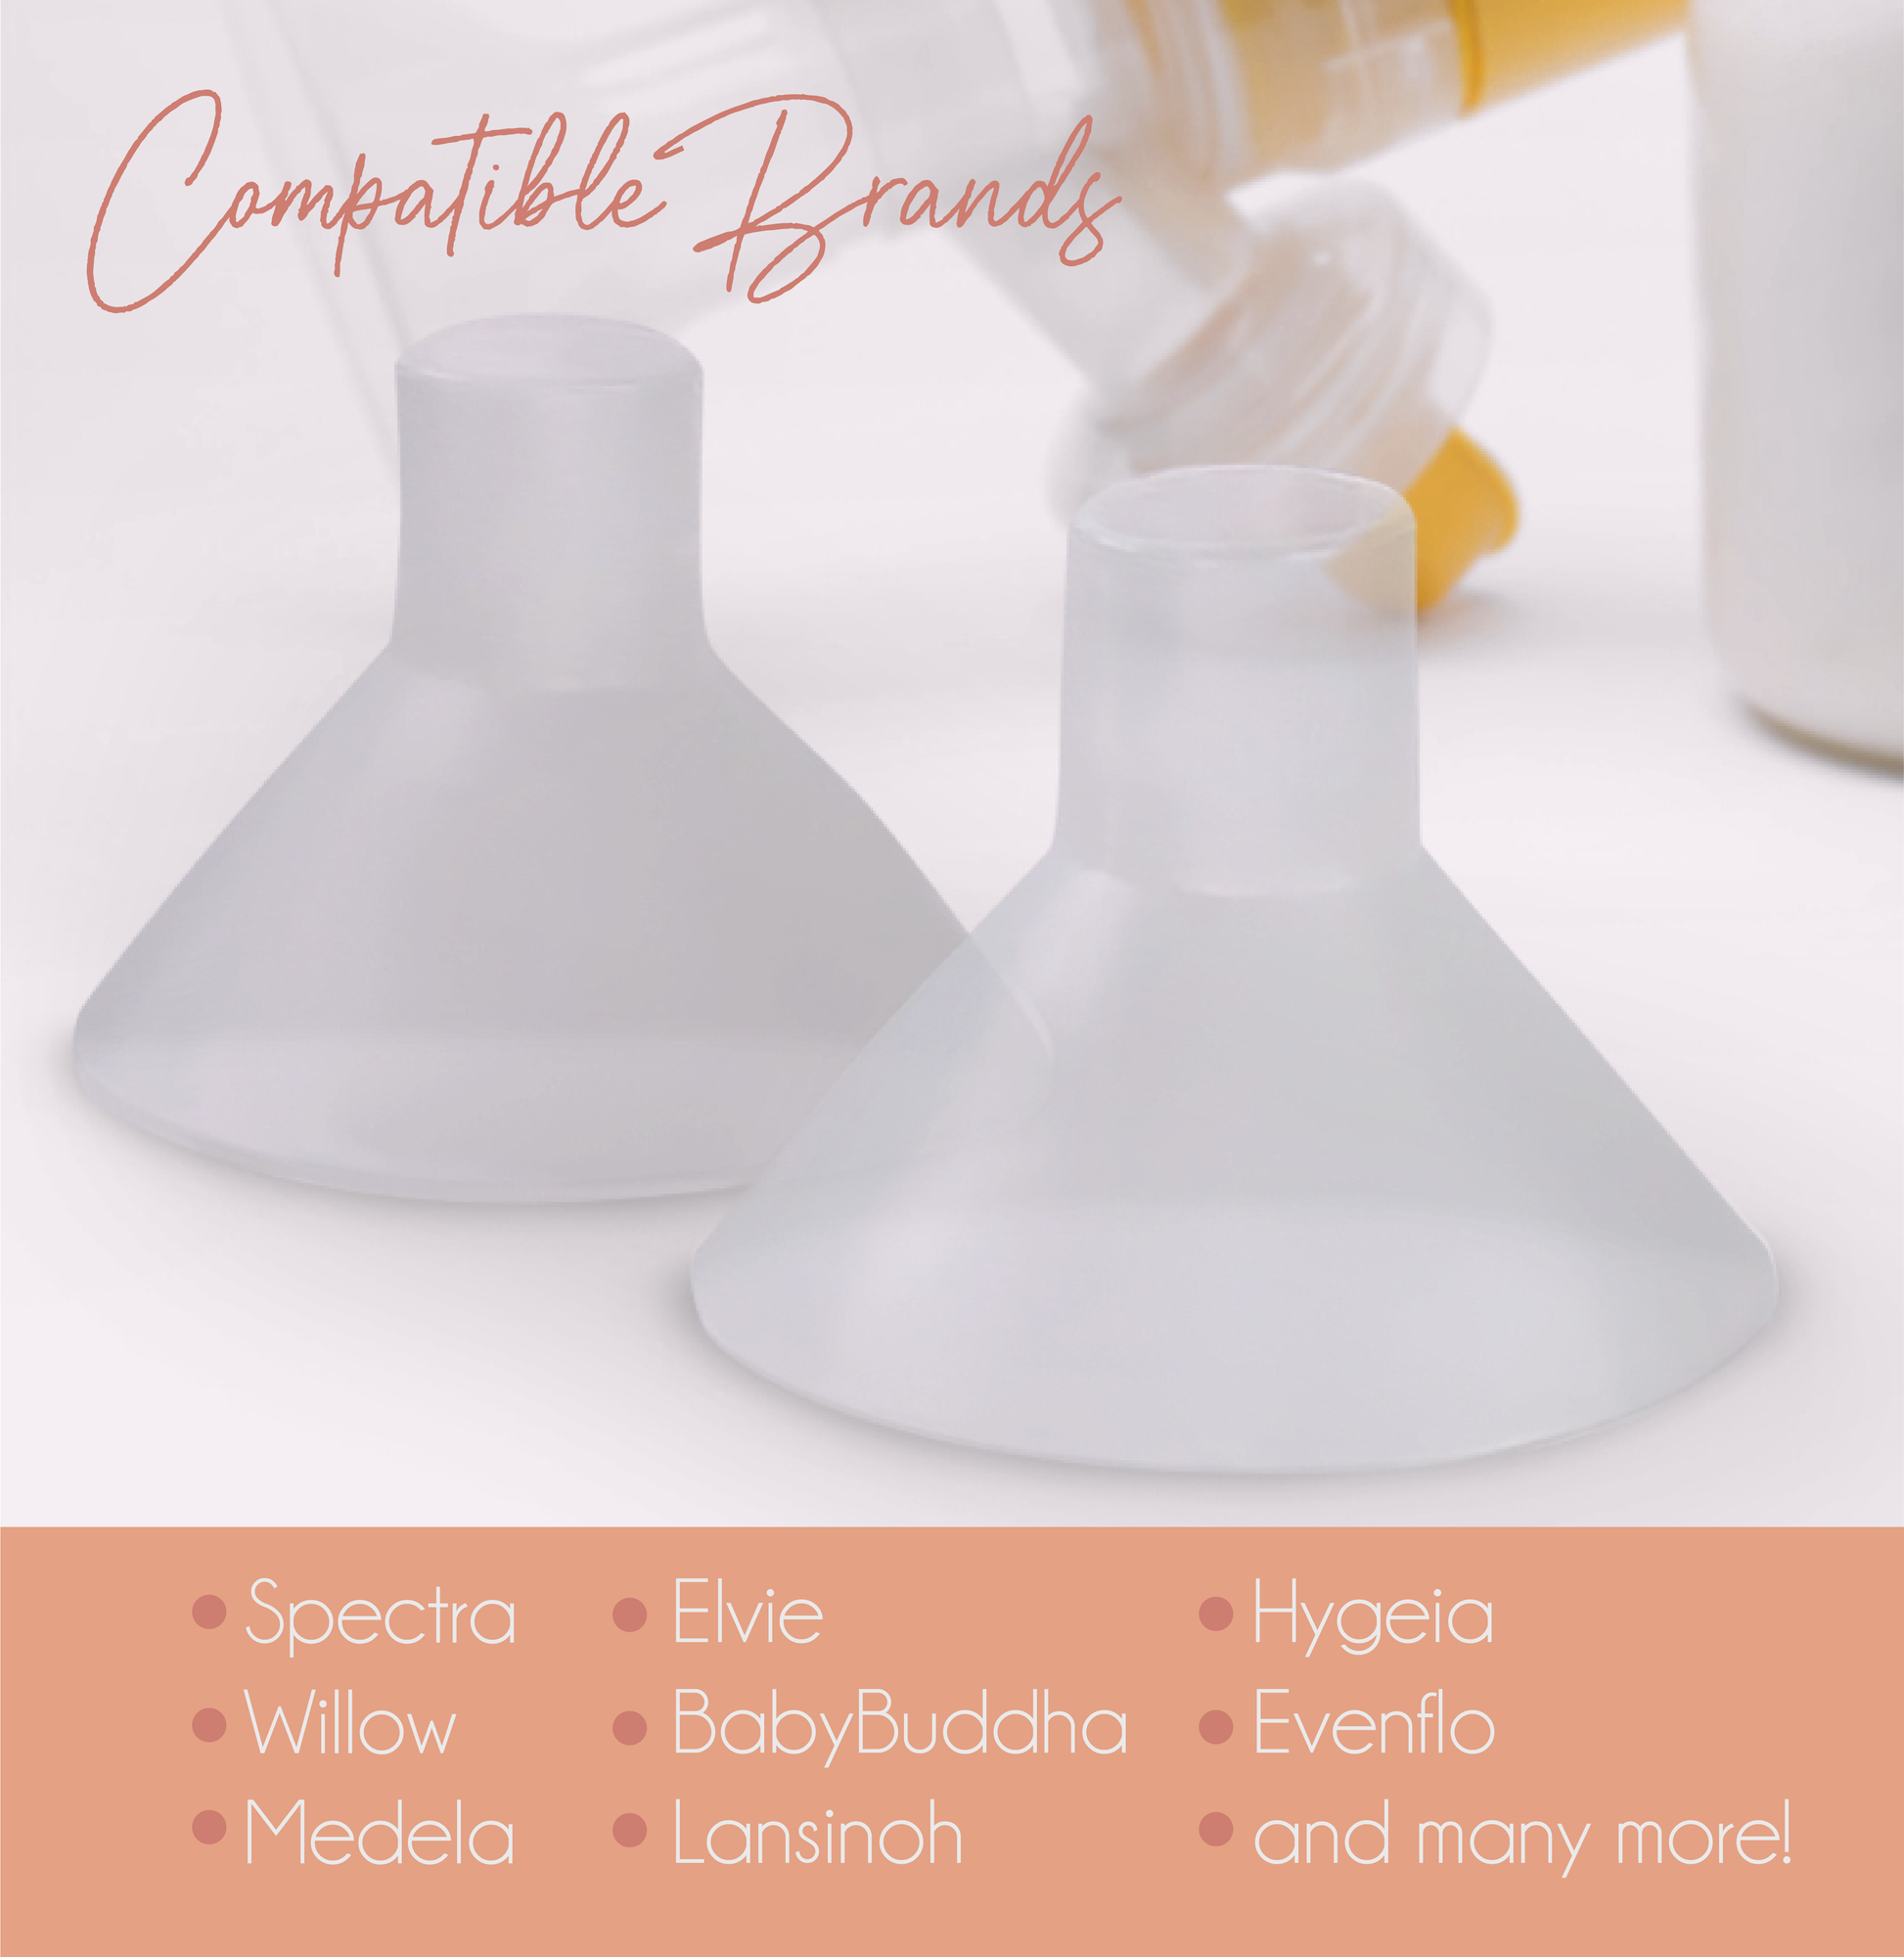 BeauGen Breast Pump Cushions are compatible with many breast pump Brands.